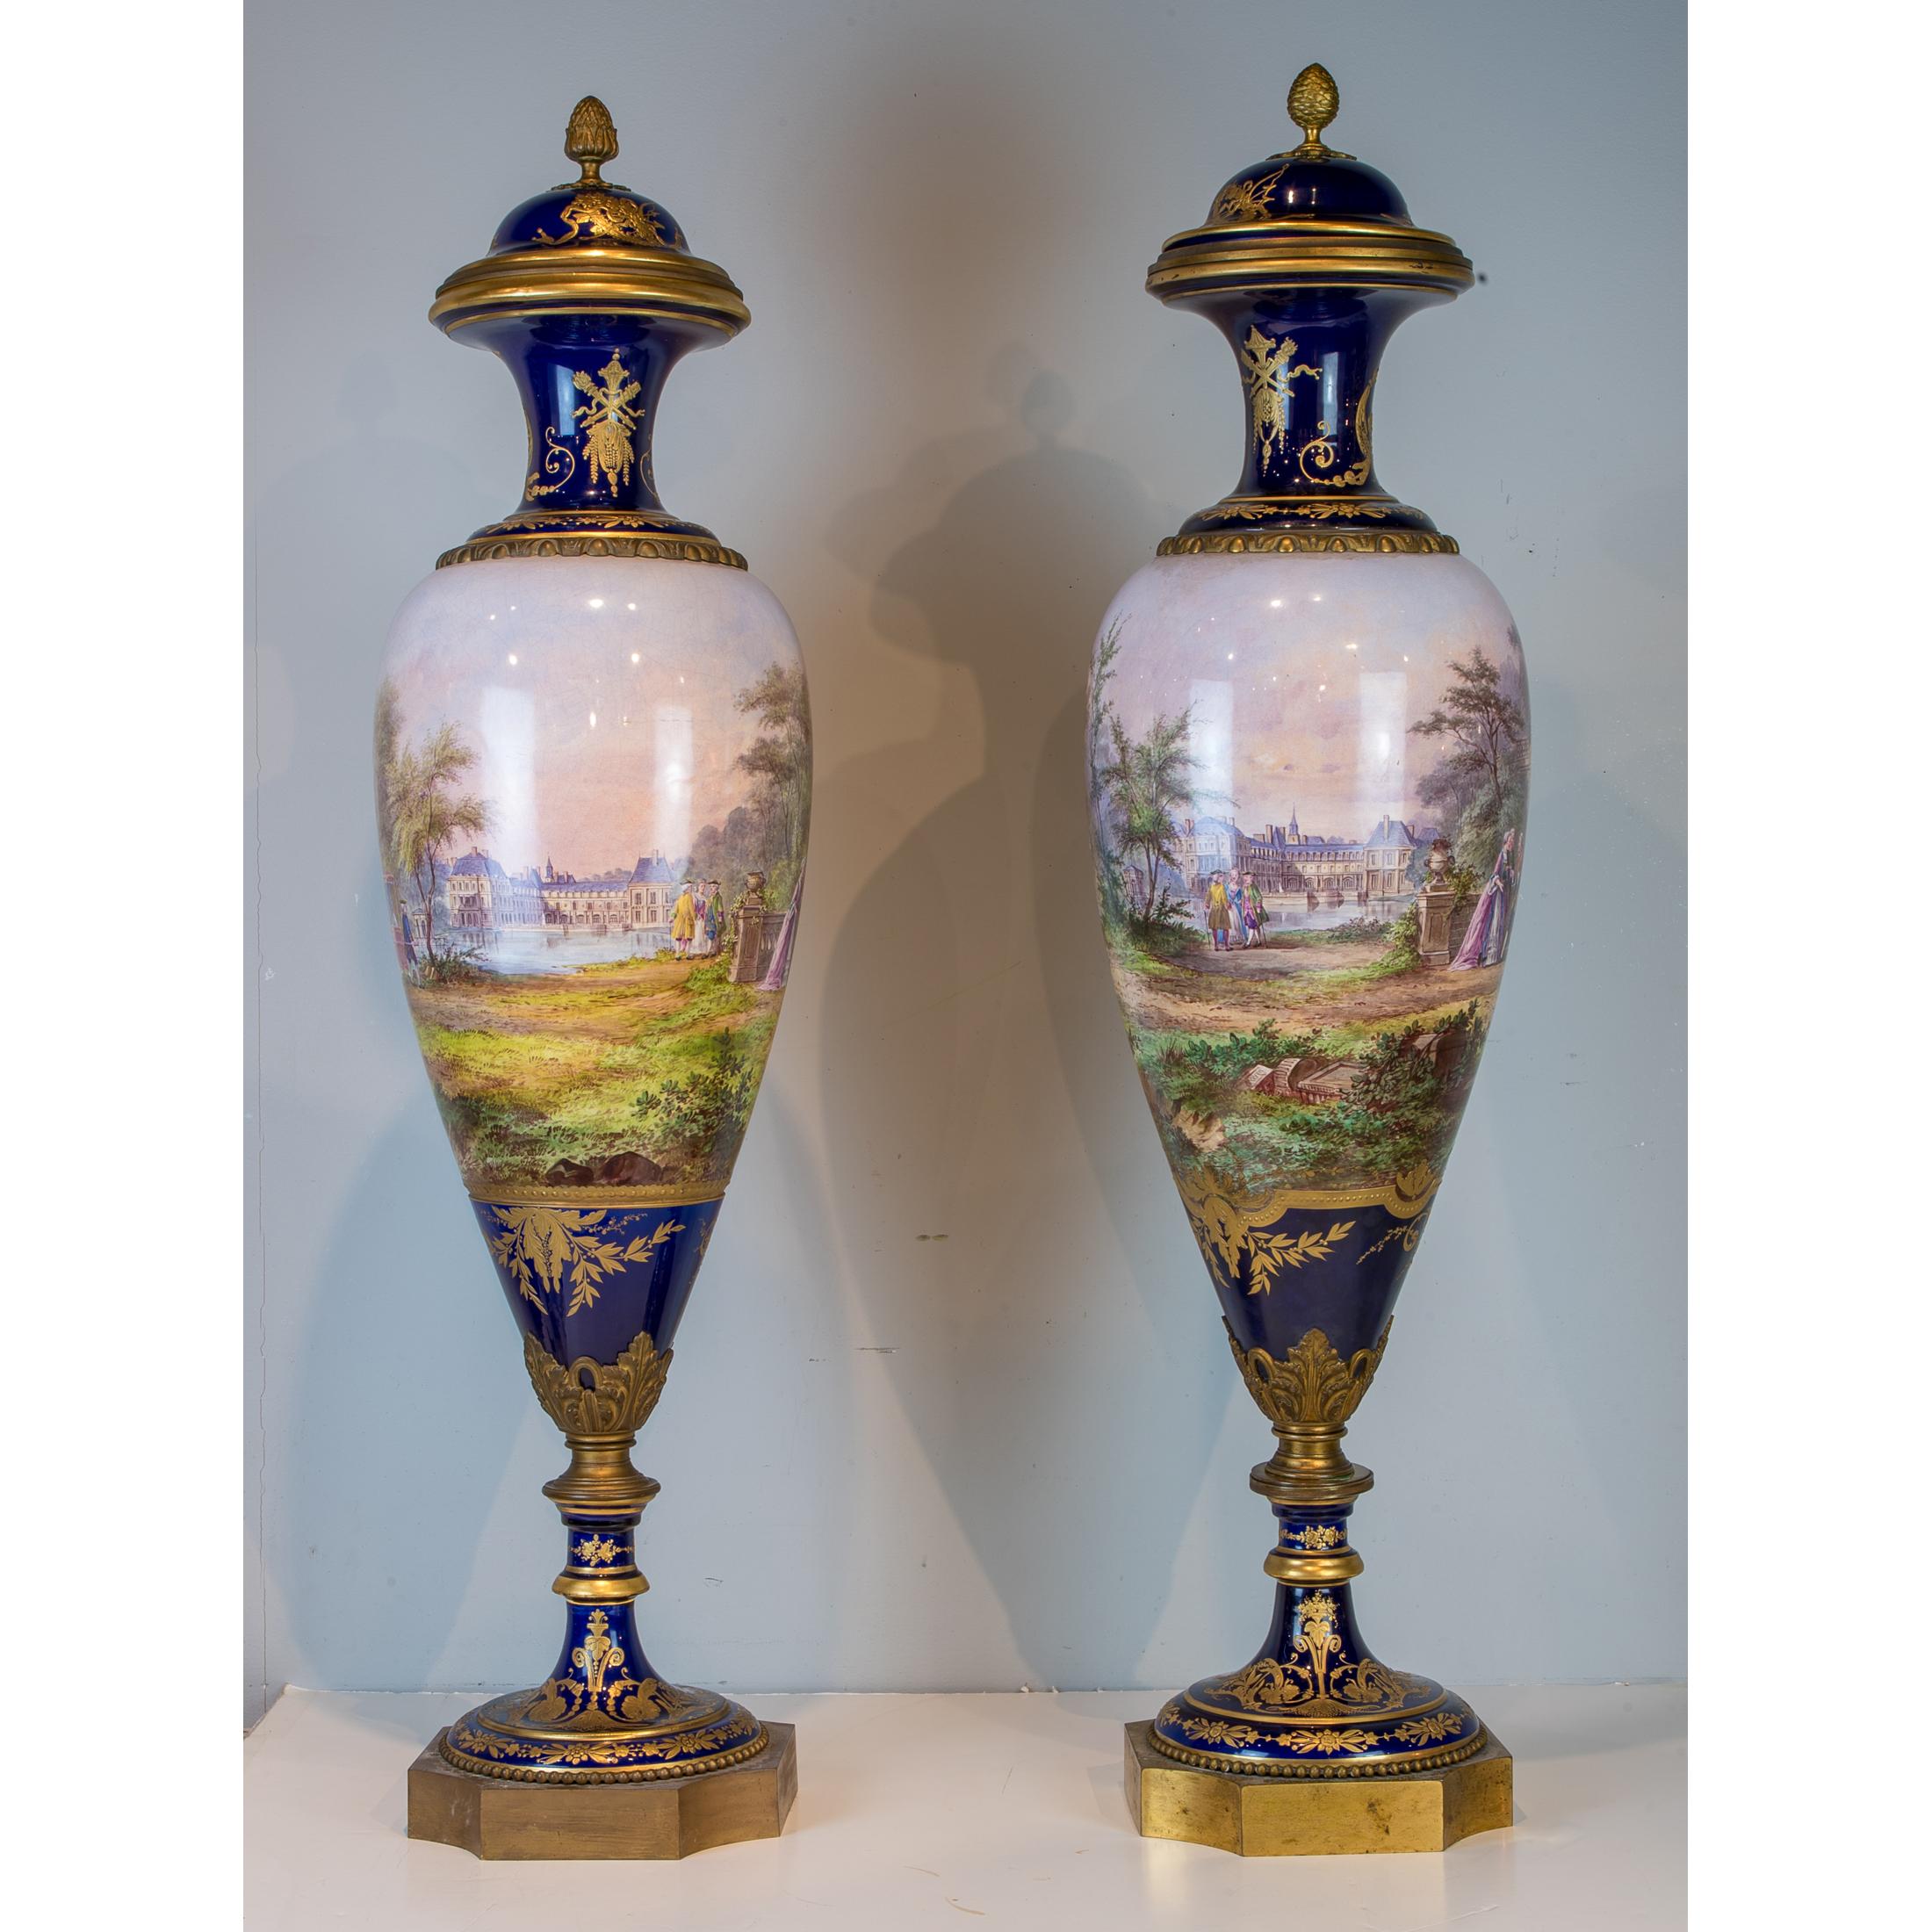 A Stunning monumental pair of Cobalt blue ground painted Sèvres porcelain vase and cover signed ‘H. Deprez.’

The paintings on the bodies of the vases are identical continuous paintings, depicting royal court members enjoying the lush grounds